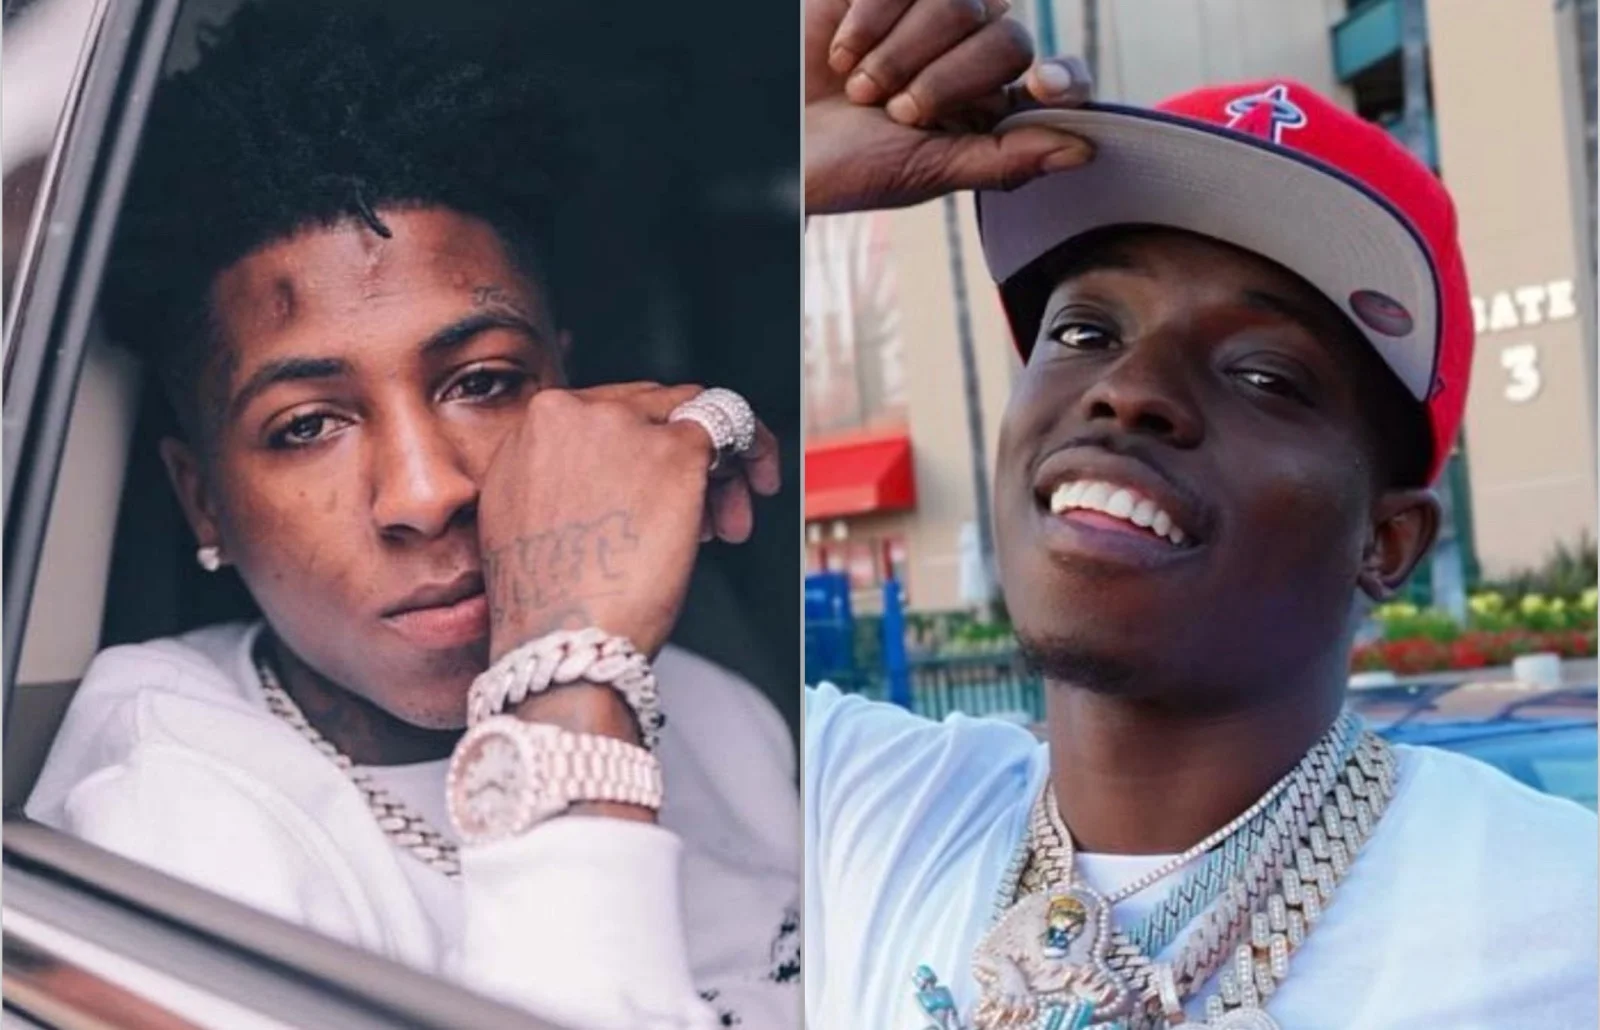 NBA YoungBoy & Bobby Shmurda Heated Twitter Beef End With Threats